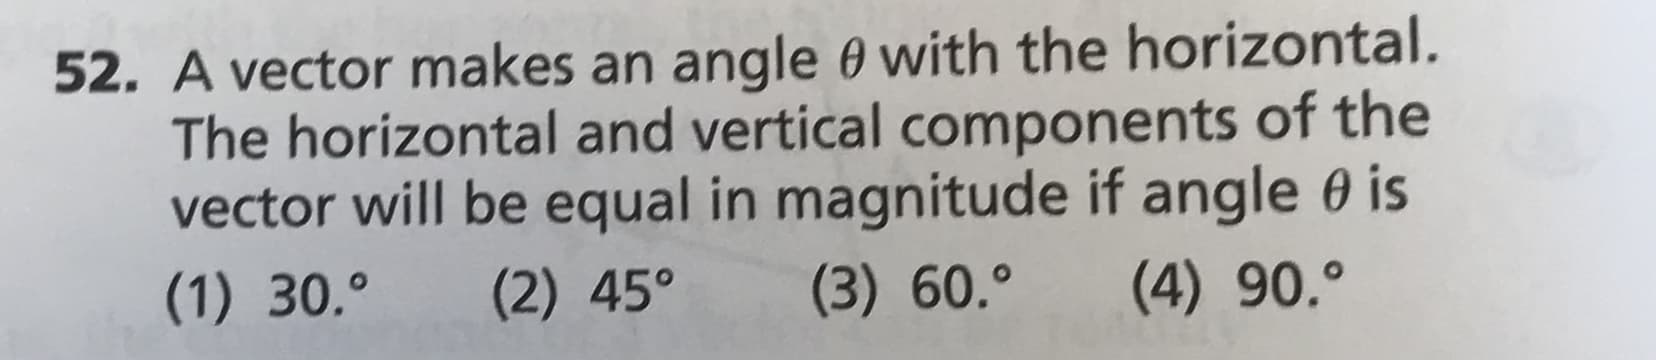 52. A vector makes an angle 0 with the horizontal.
The horizontal and vertical components of the
vector will be equal in magnitude if angle 0 is
(1) 30.
(2) 45°
(3) 60.°
(4) 90.0
